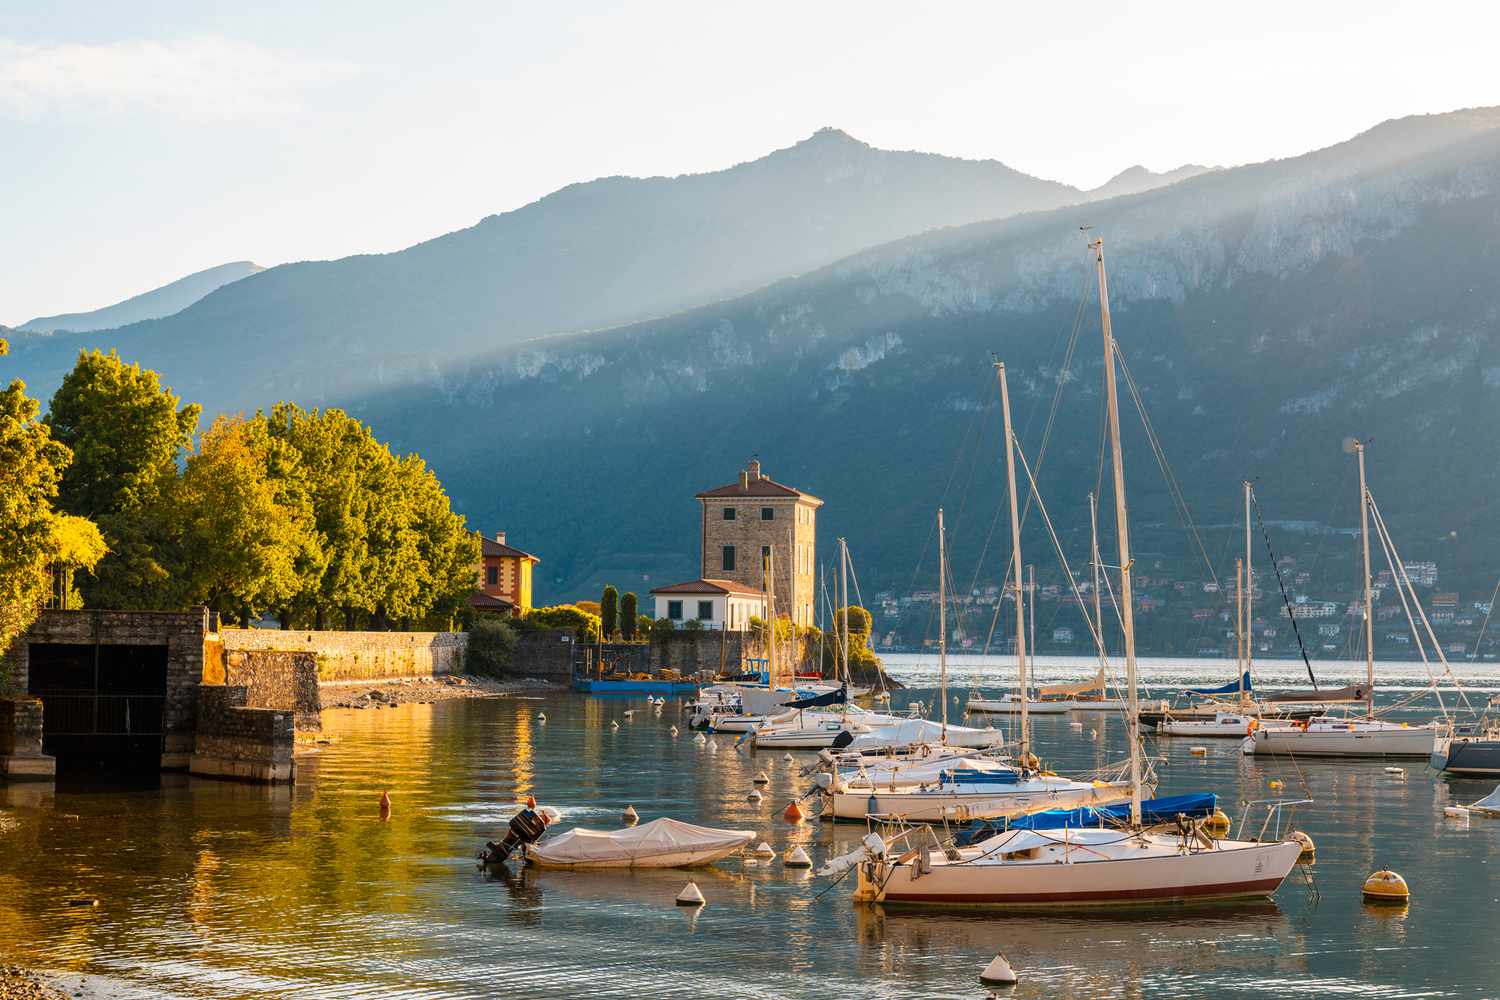 Italy's Deepest Lake Is Also Its Most Glamorous — With Luxury Hotels, Stunning Mountain Views, and Fairy-tale Towns